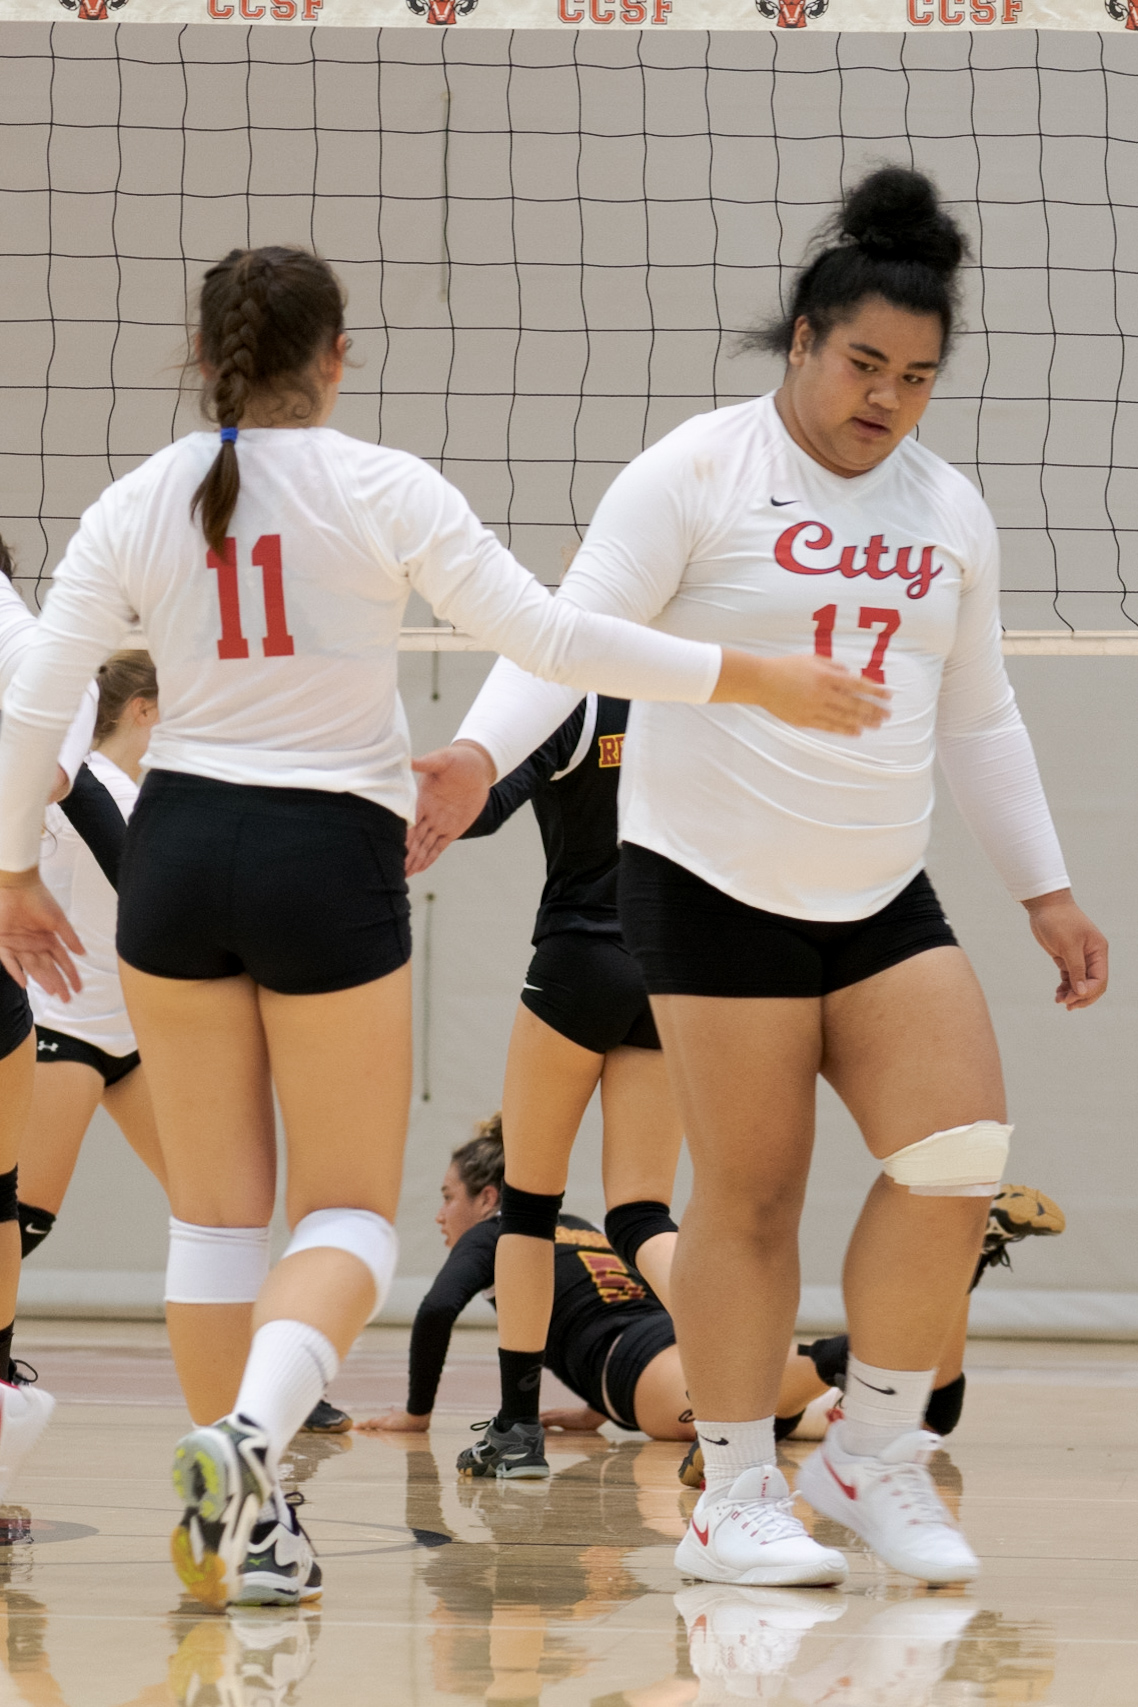 After successfully blocking an attack, Allysha Seuteni (#17) and Sydney Huddseston (#11) cheer each other on, Friday, September 21, 2018 at the Ocean Campus Welness Center Gym. Photo by Cliff Fernandes/The Guardsman